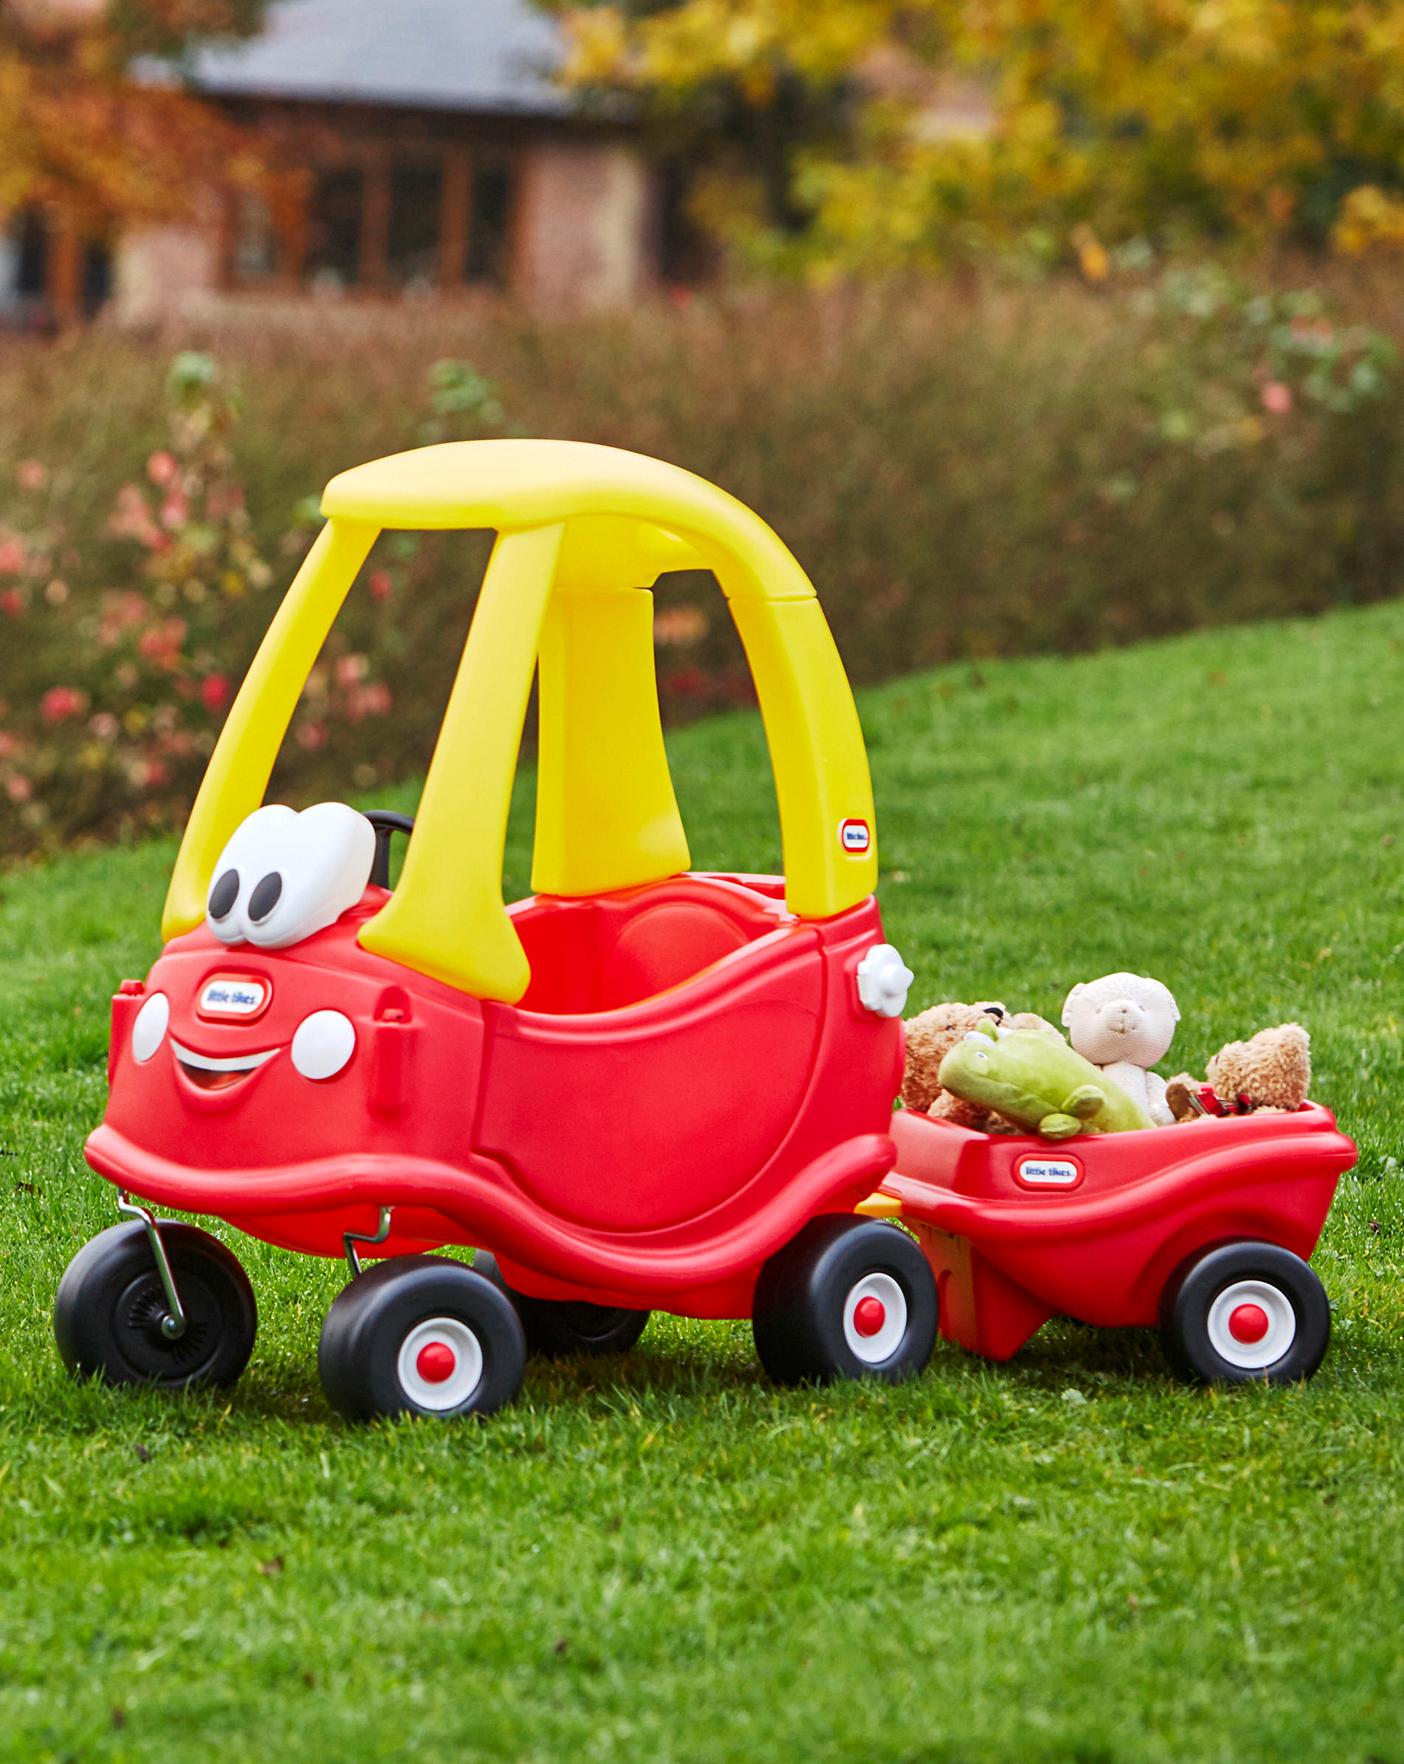 little tikes cozy coupe trailer red